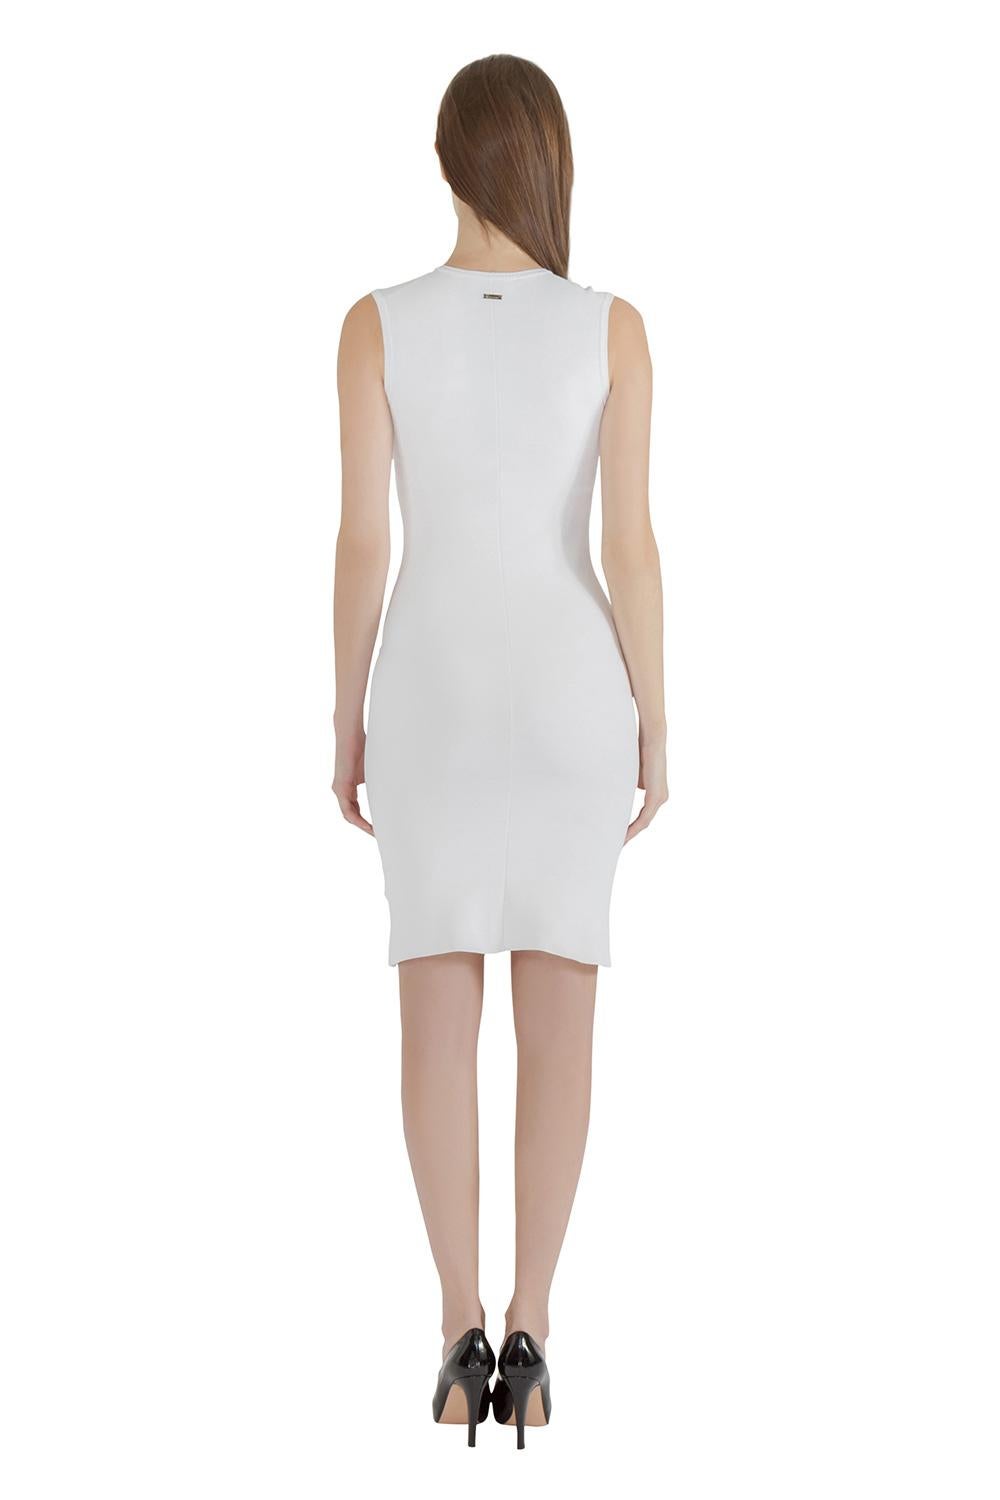 This tank dress from Dsquared2 is form-fitting and comfortable to wear. It is styled in an off-white hue with ribbed trims and a V neckline. While this dress will look great with pumps, it can also be paired with sneakers for casual